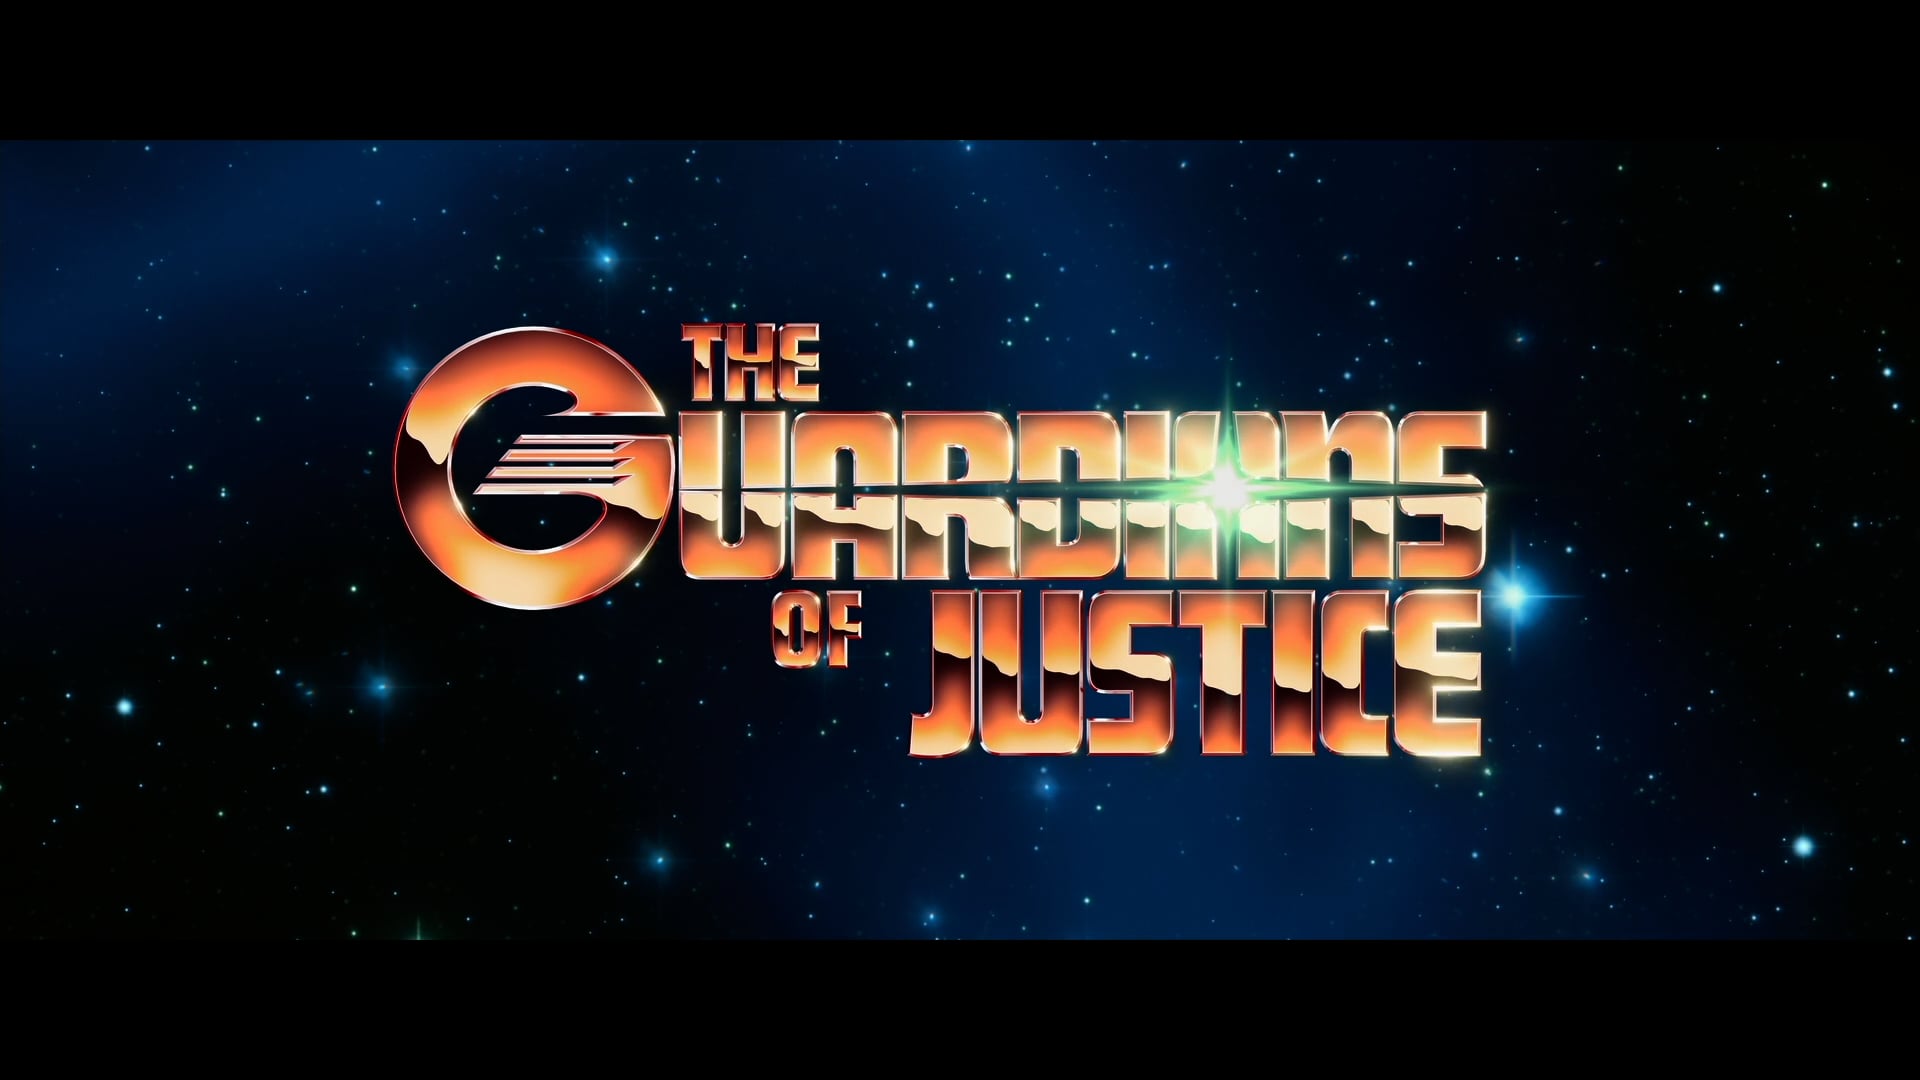 Guardians of Justice [Official Trailer]